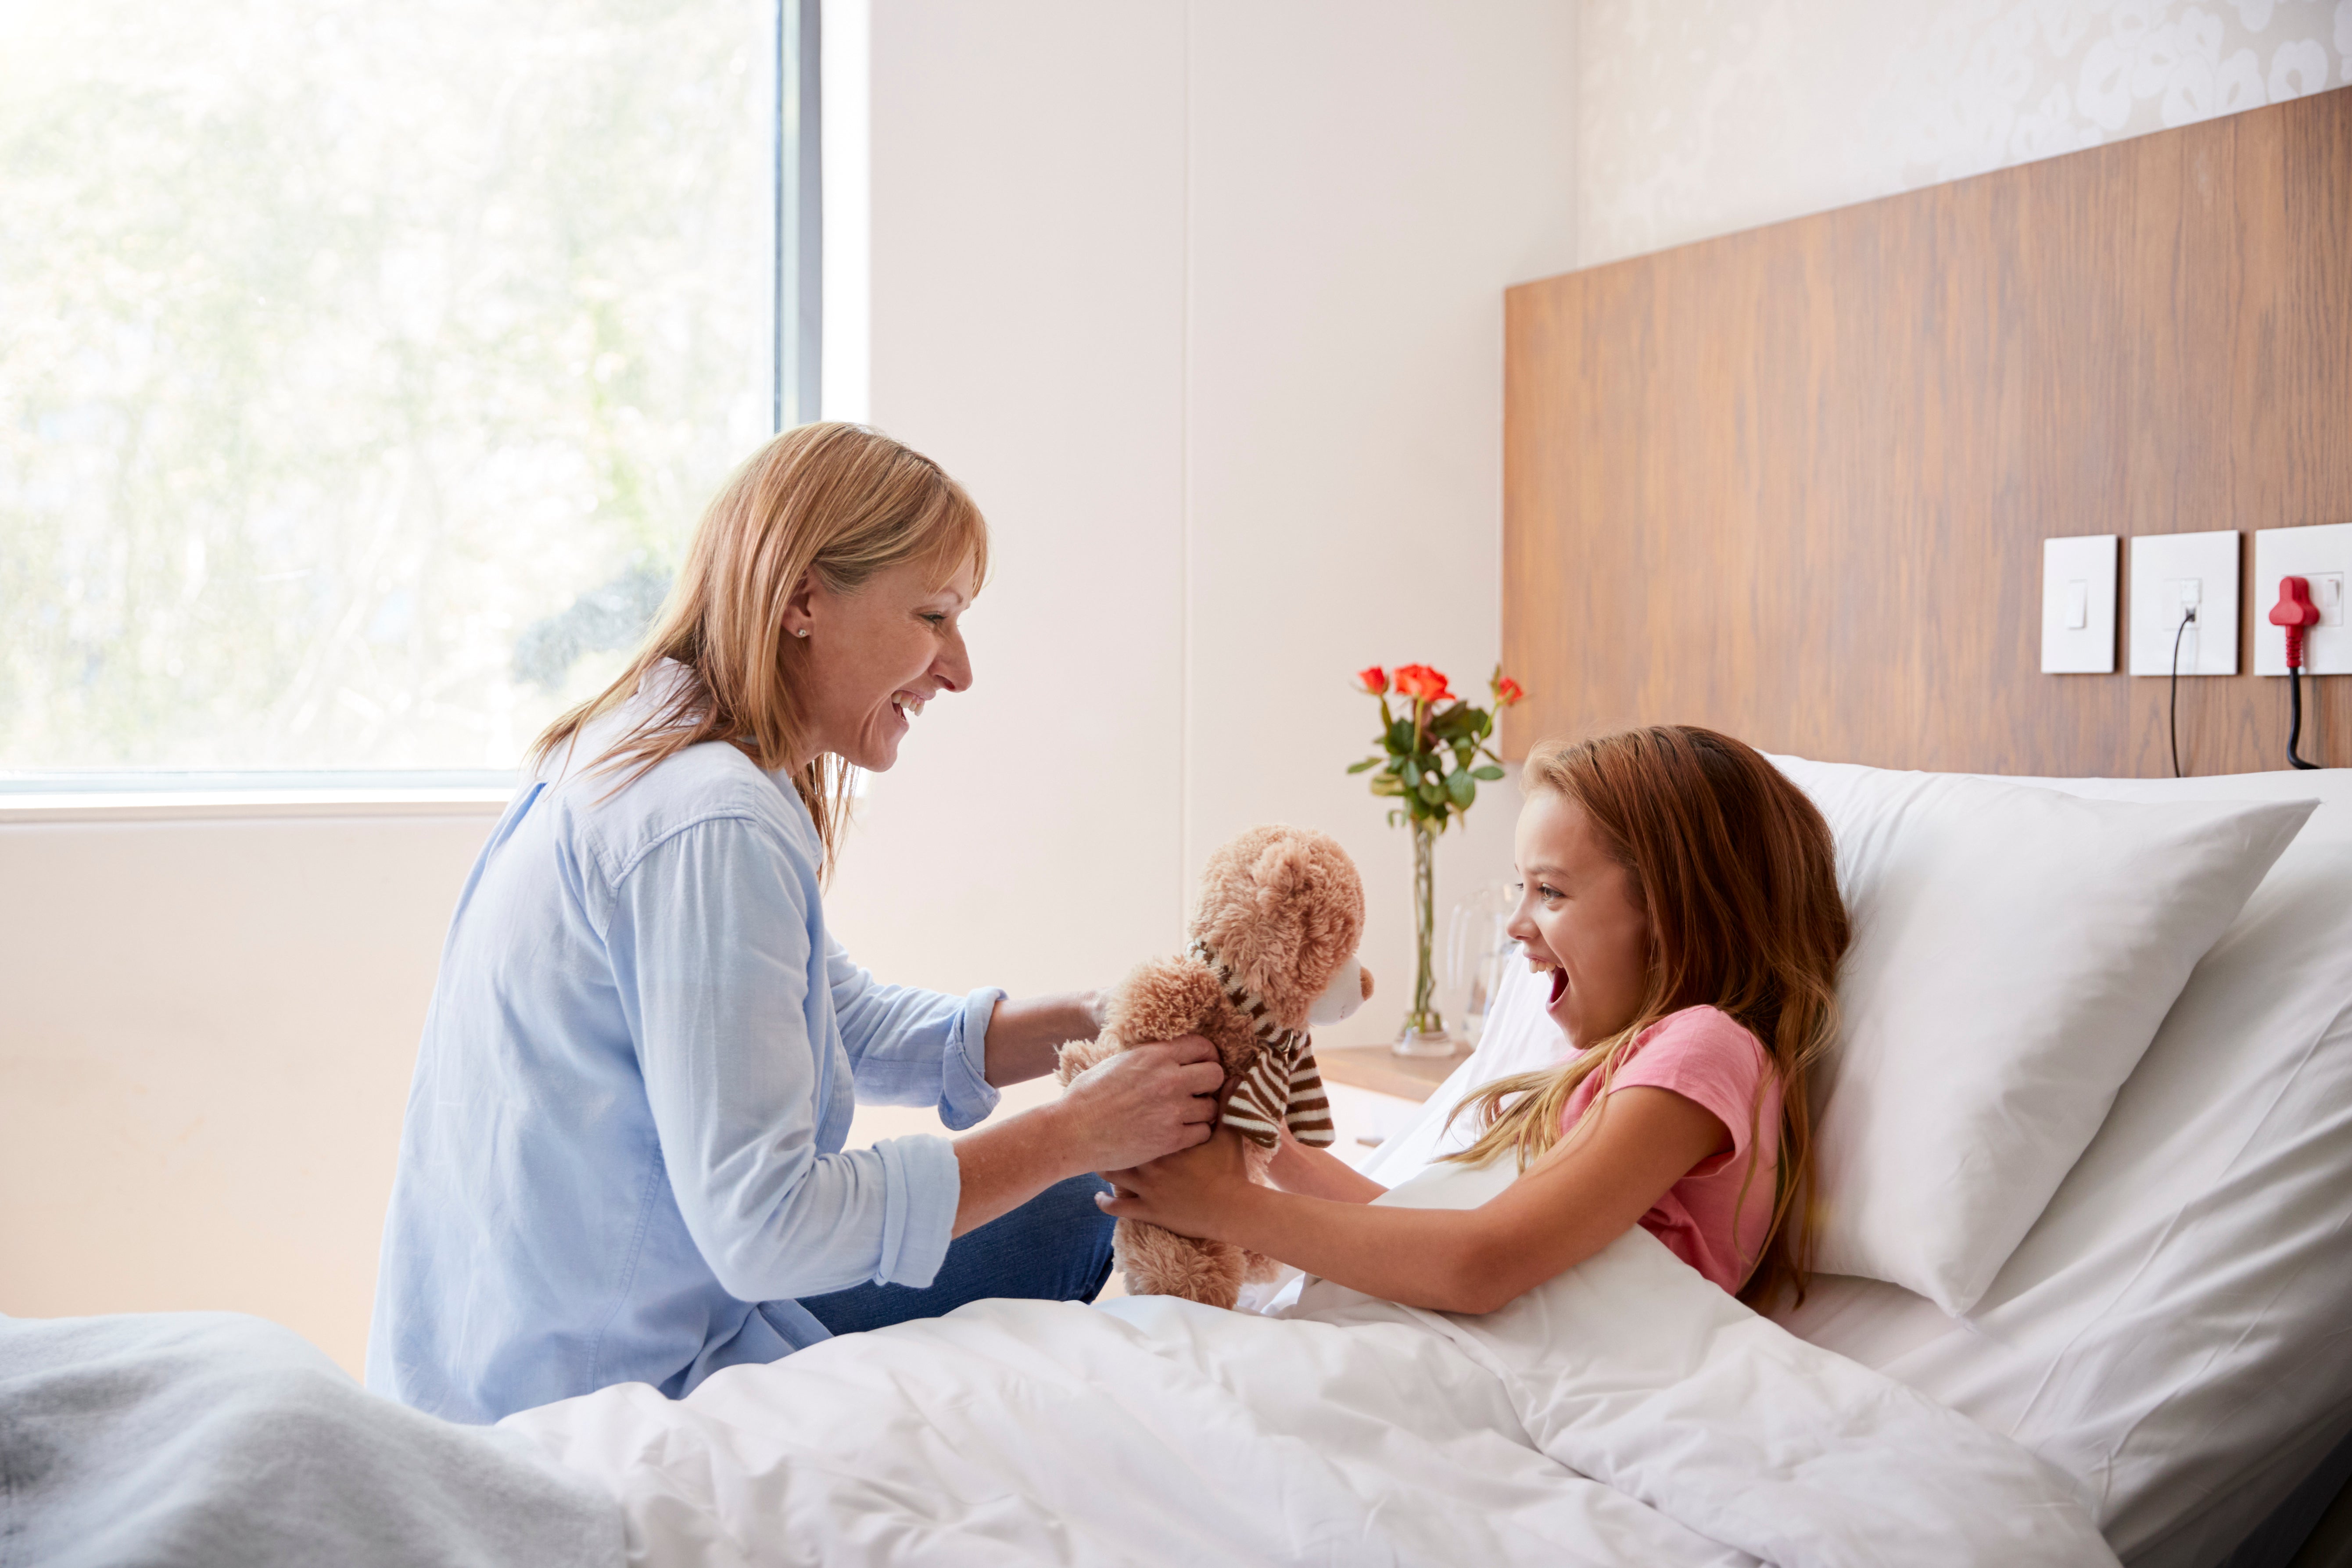 Supporting Parents and Children During Unexpected Hospital Stays